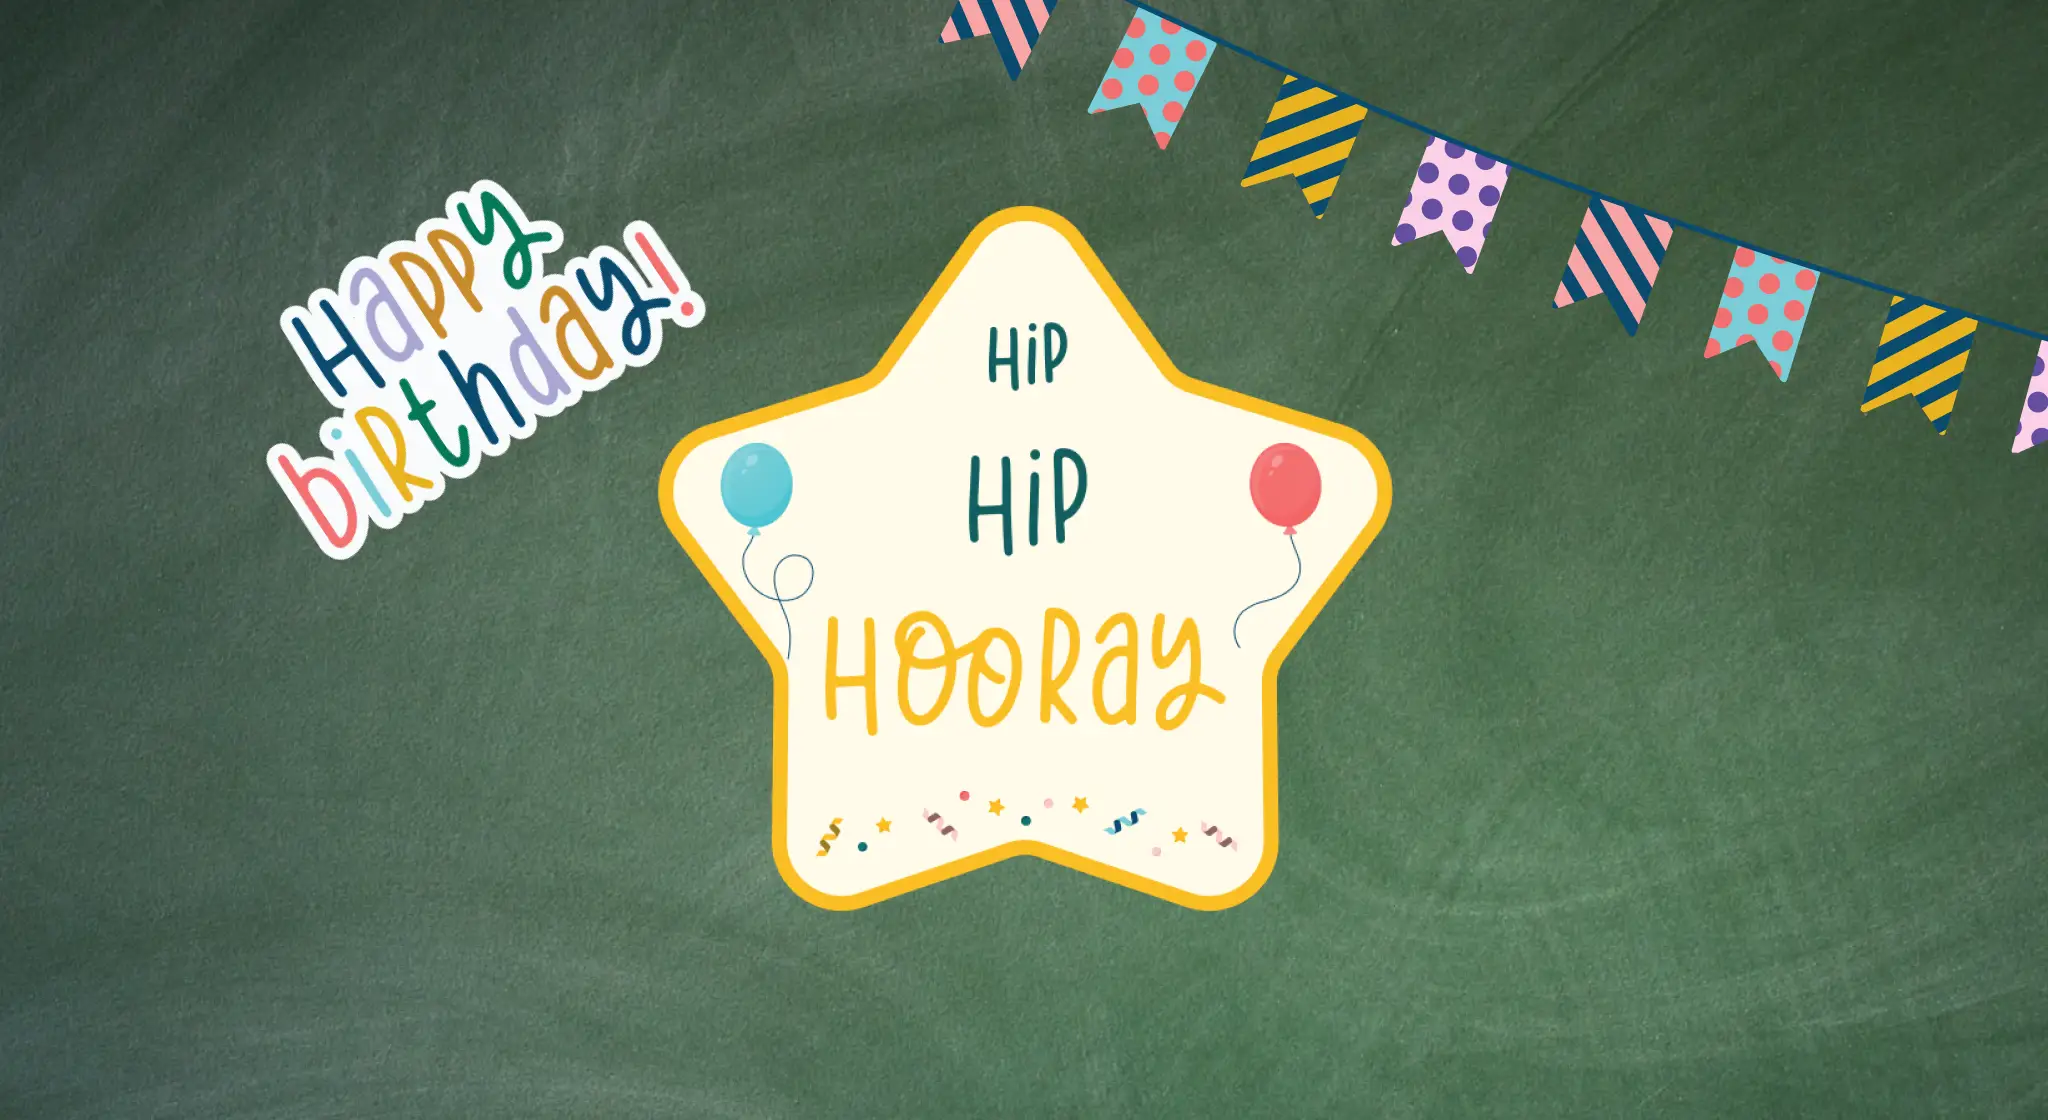 Hip hip hooray - it's your special day!